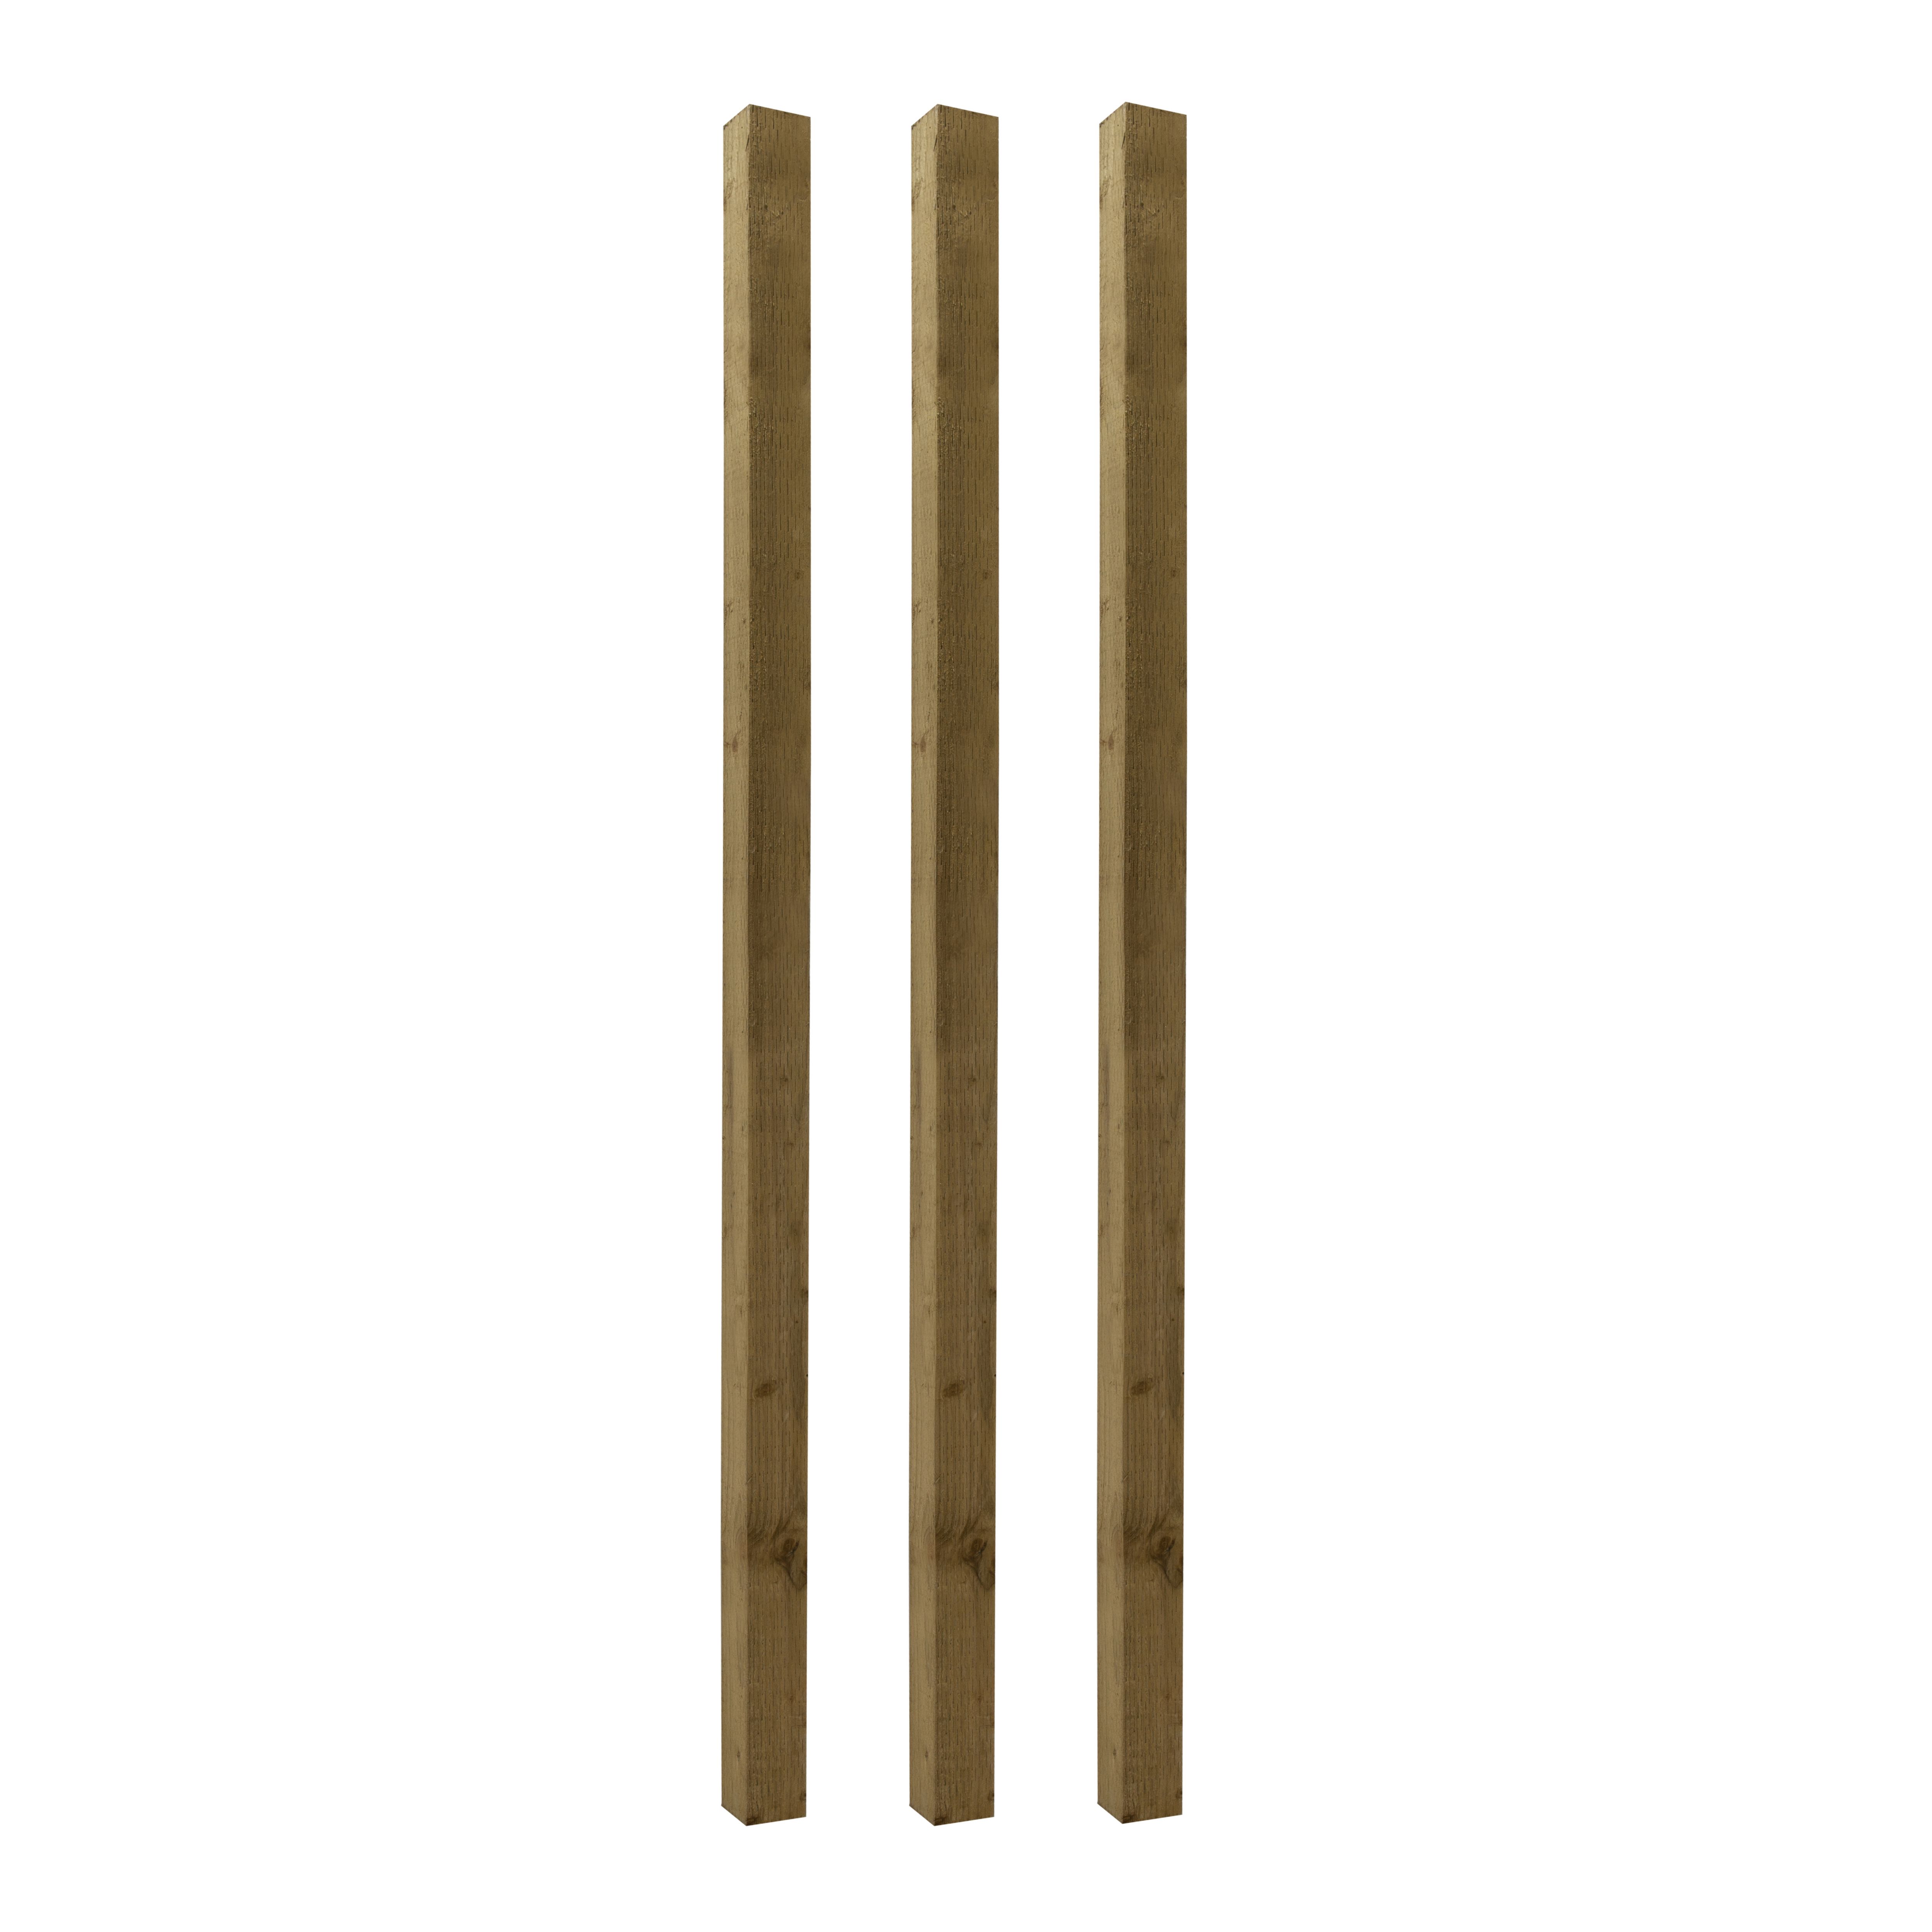 UC4 Green Square Wooden Fence post (H)2.1m (W)75mm, Pack of 3